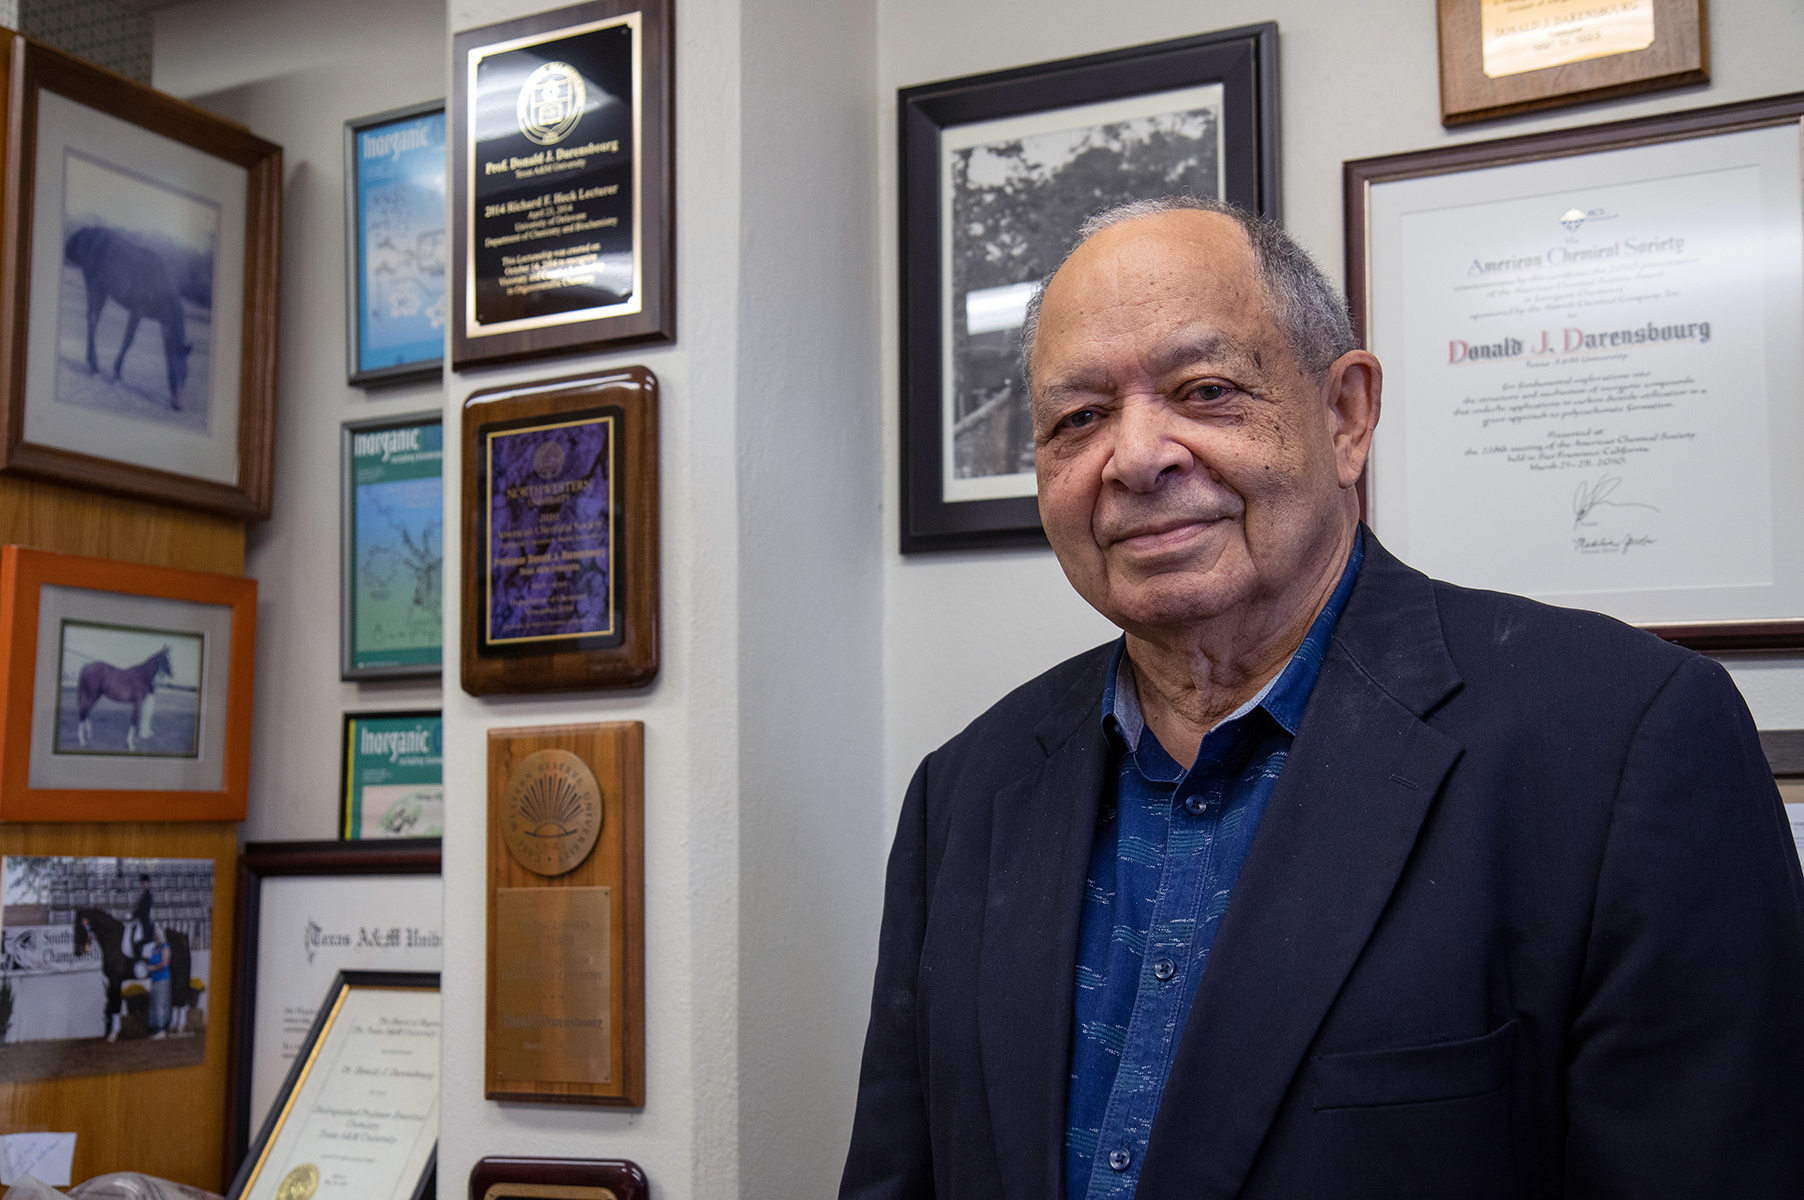 Texas A&amp;M chemist Donald Darensbourg pictured in his office within the Texas A&amp;M Chemistry Building